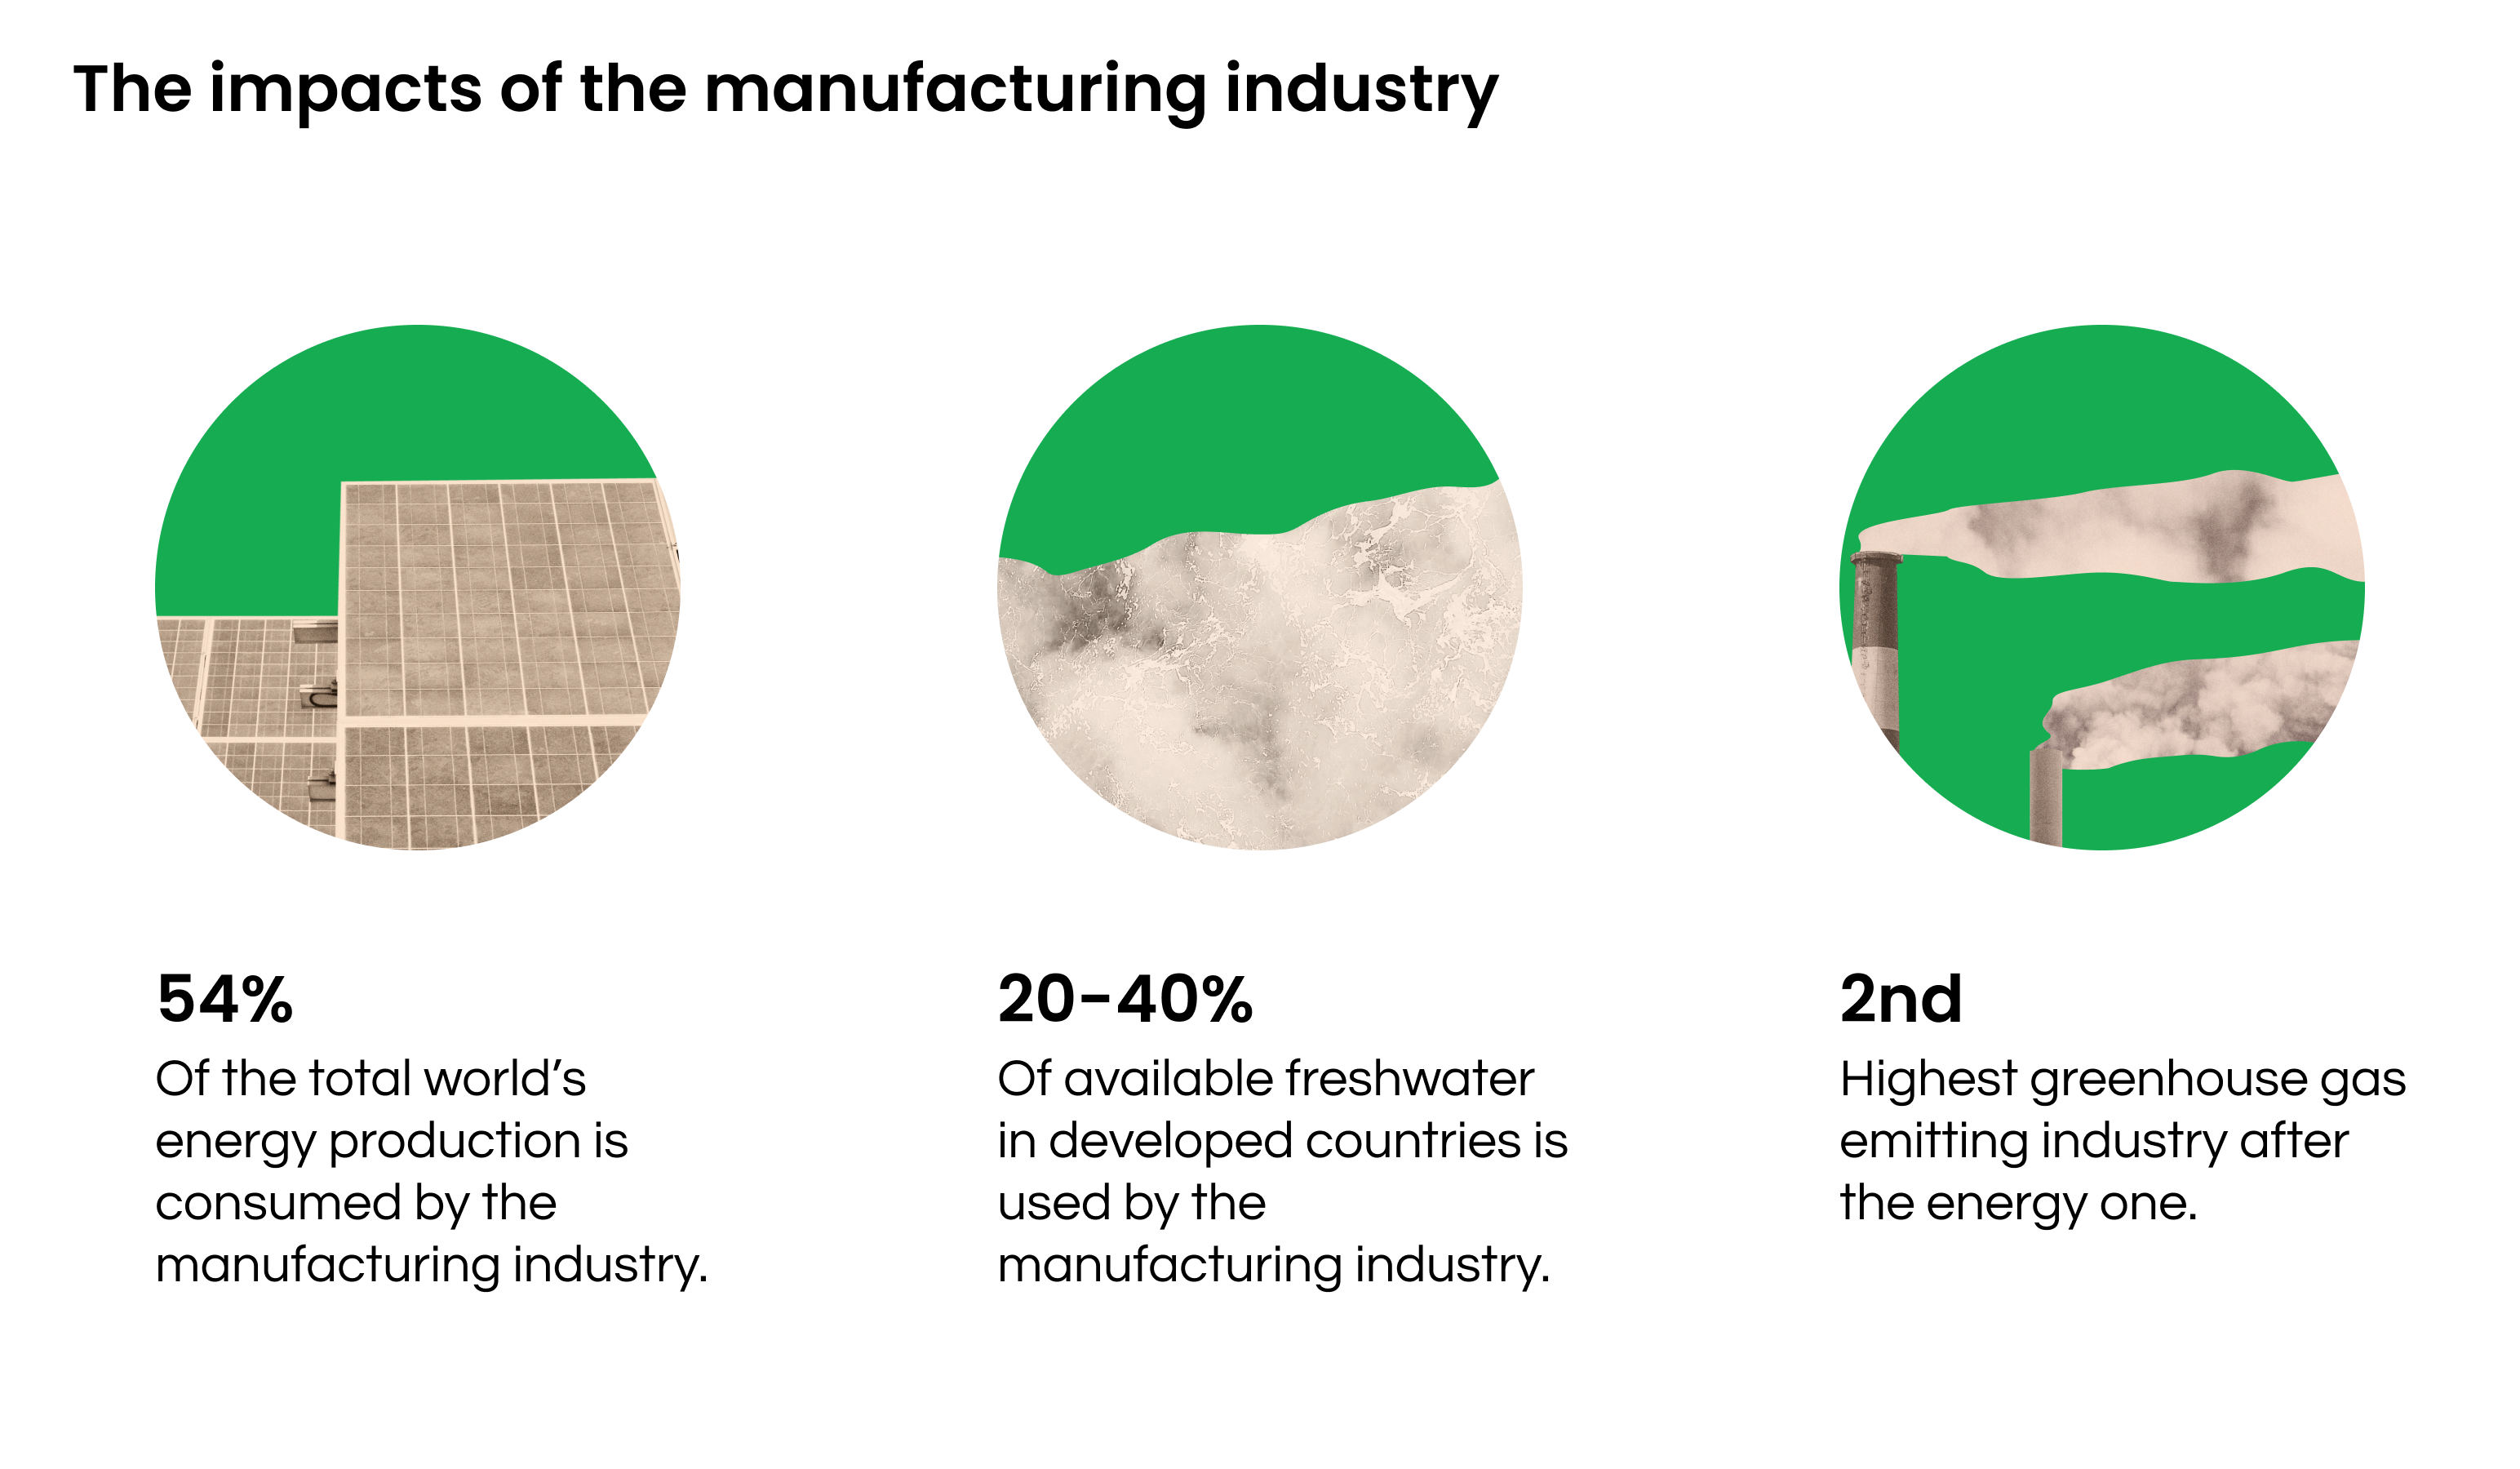 Figure 1. the impacts of the manufacturing industry